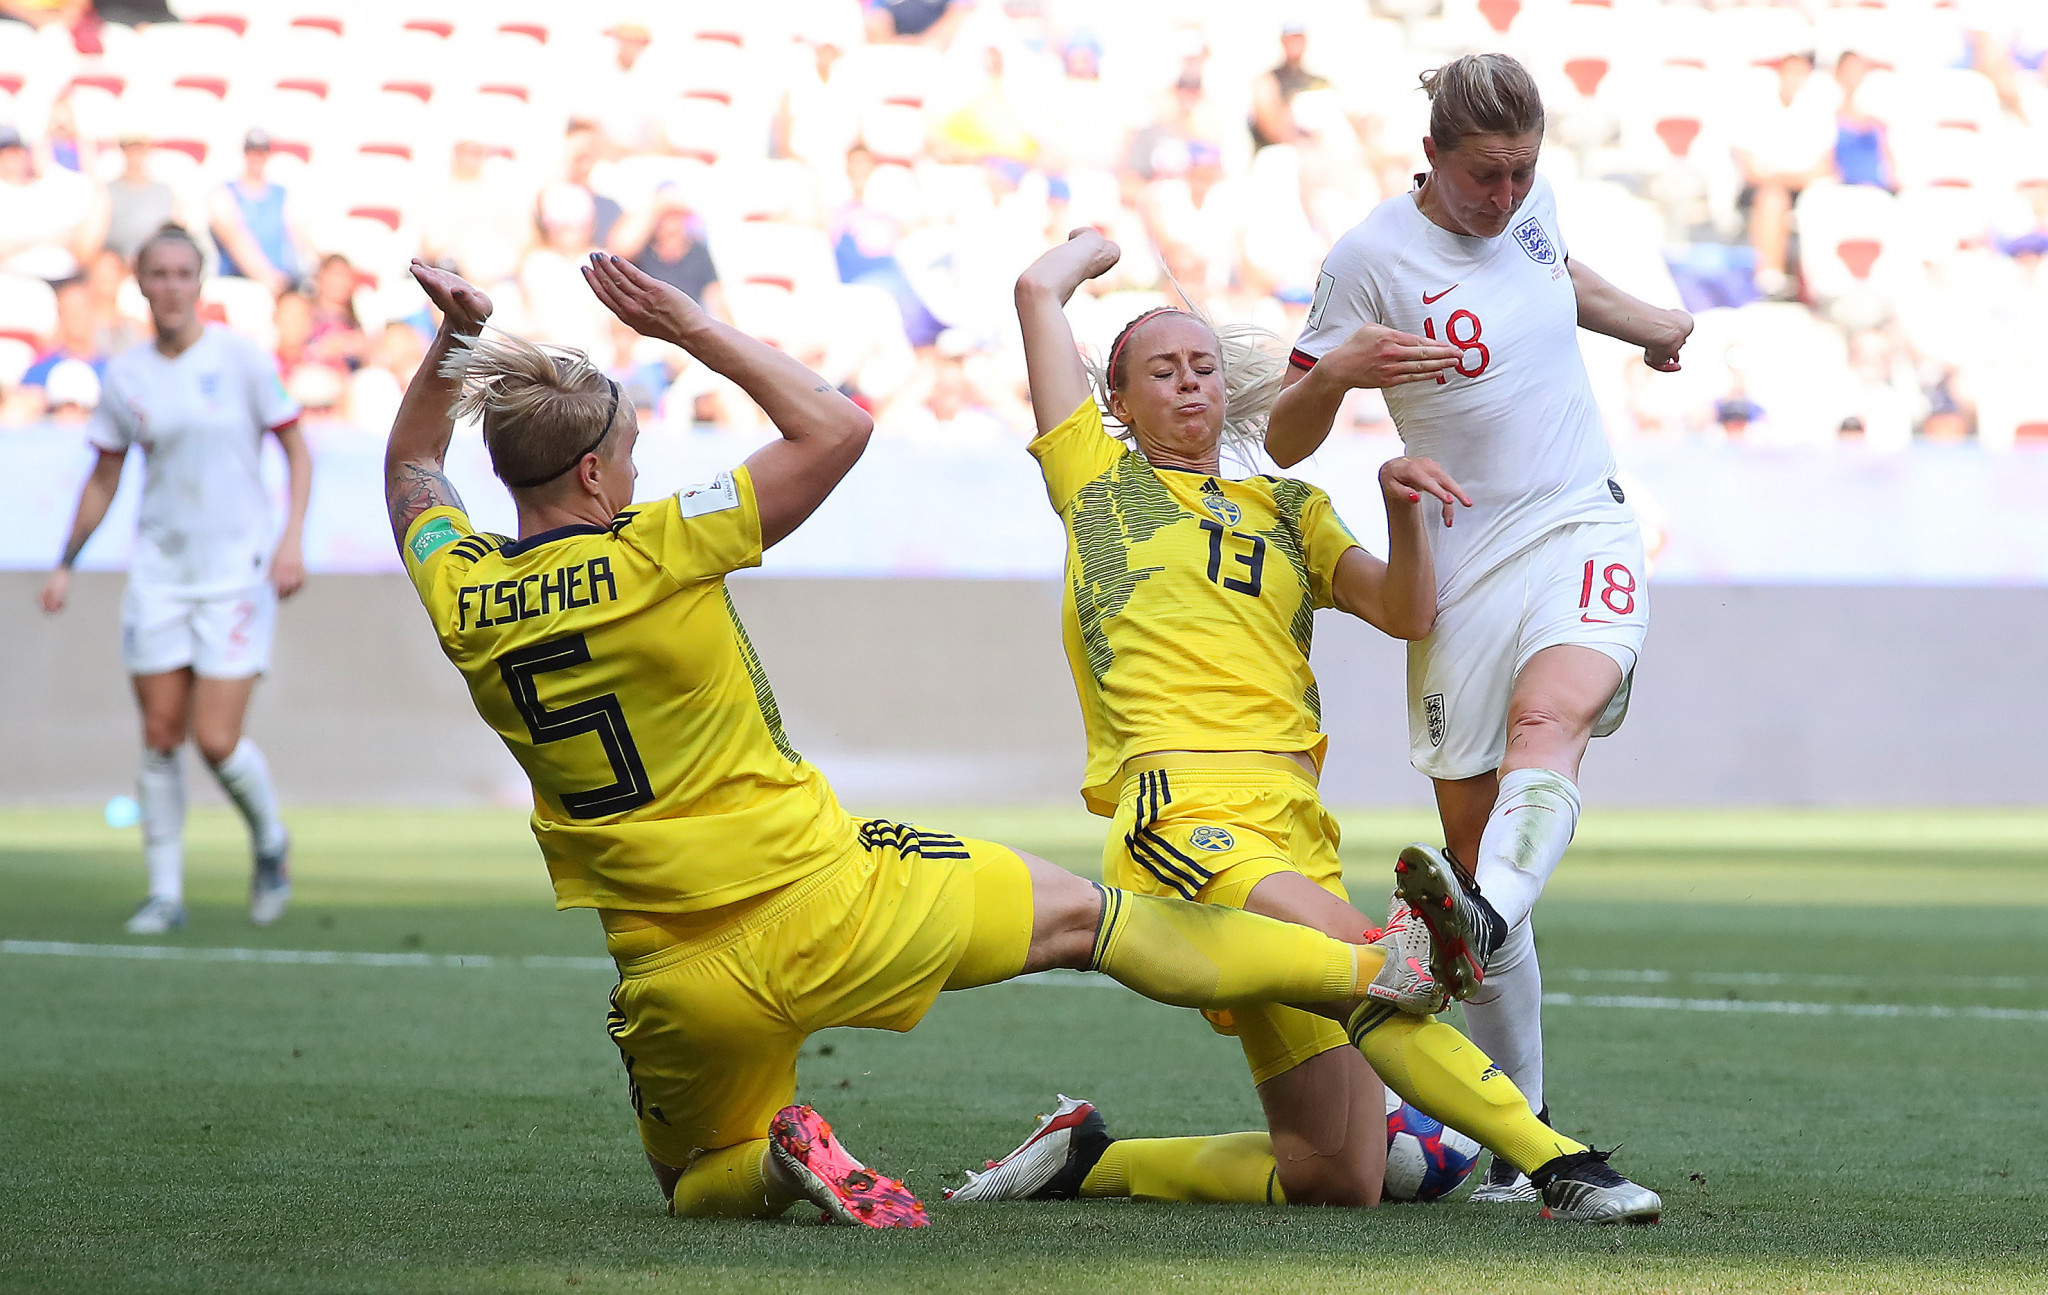 Nilla Fischer put in a superb performance to prevent England from drawing level ©Getty Images